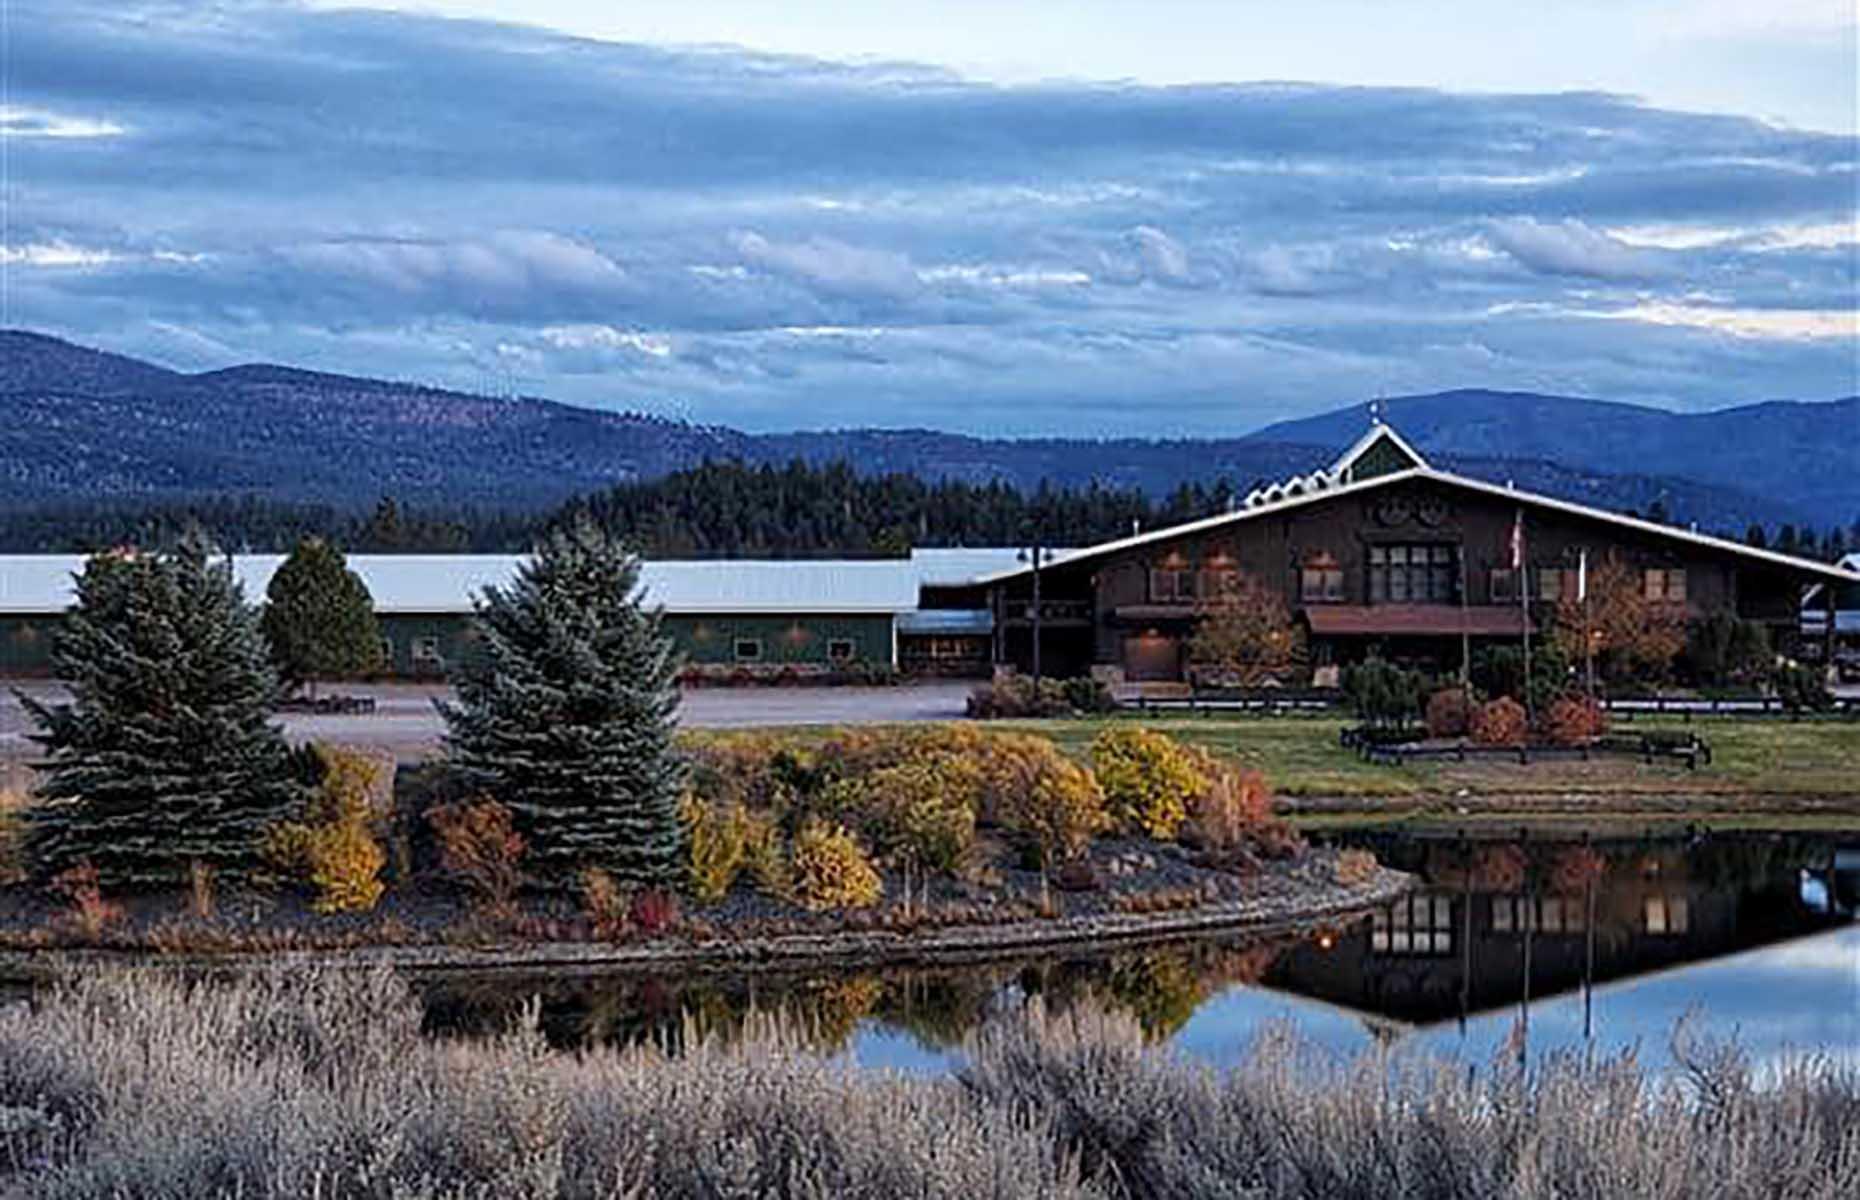 <p>This lavish property is a level up from a classic hotel, offering a series of lodges and glamping options across 37,000 acres of Montana's wilderness, on a working cattle ranch. It's set out along the Blackfoot River and guests can strap in for all sorts of outdoor adventures, from rafting and climbing to horse-back riding – the Saddle Club (pictured) is the largest private equestrian center in the state. If you'd prefer to slow the pace, there's a spa (housed in a string of tents), while the on-site 's’moreologists' will help you make the perfect, oozing s'mores.</p>